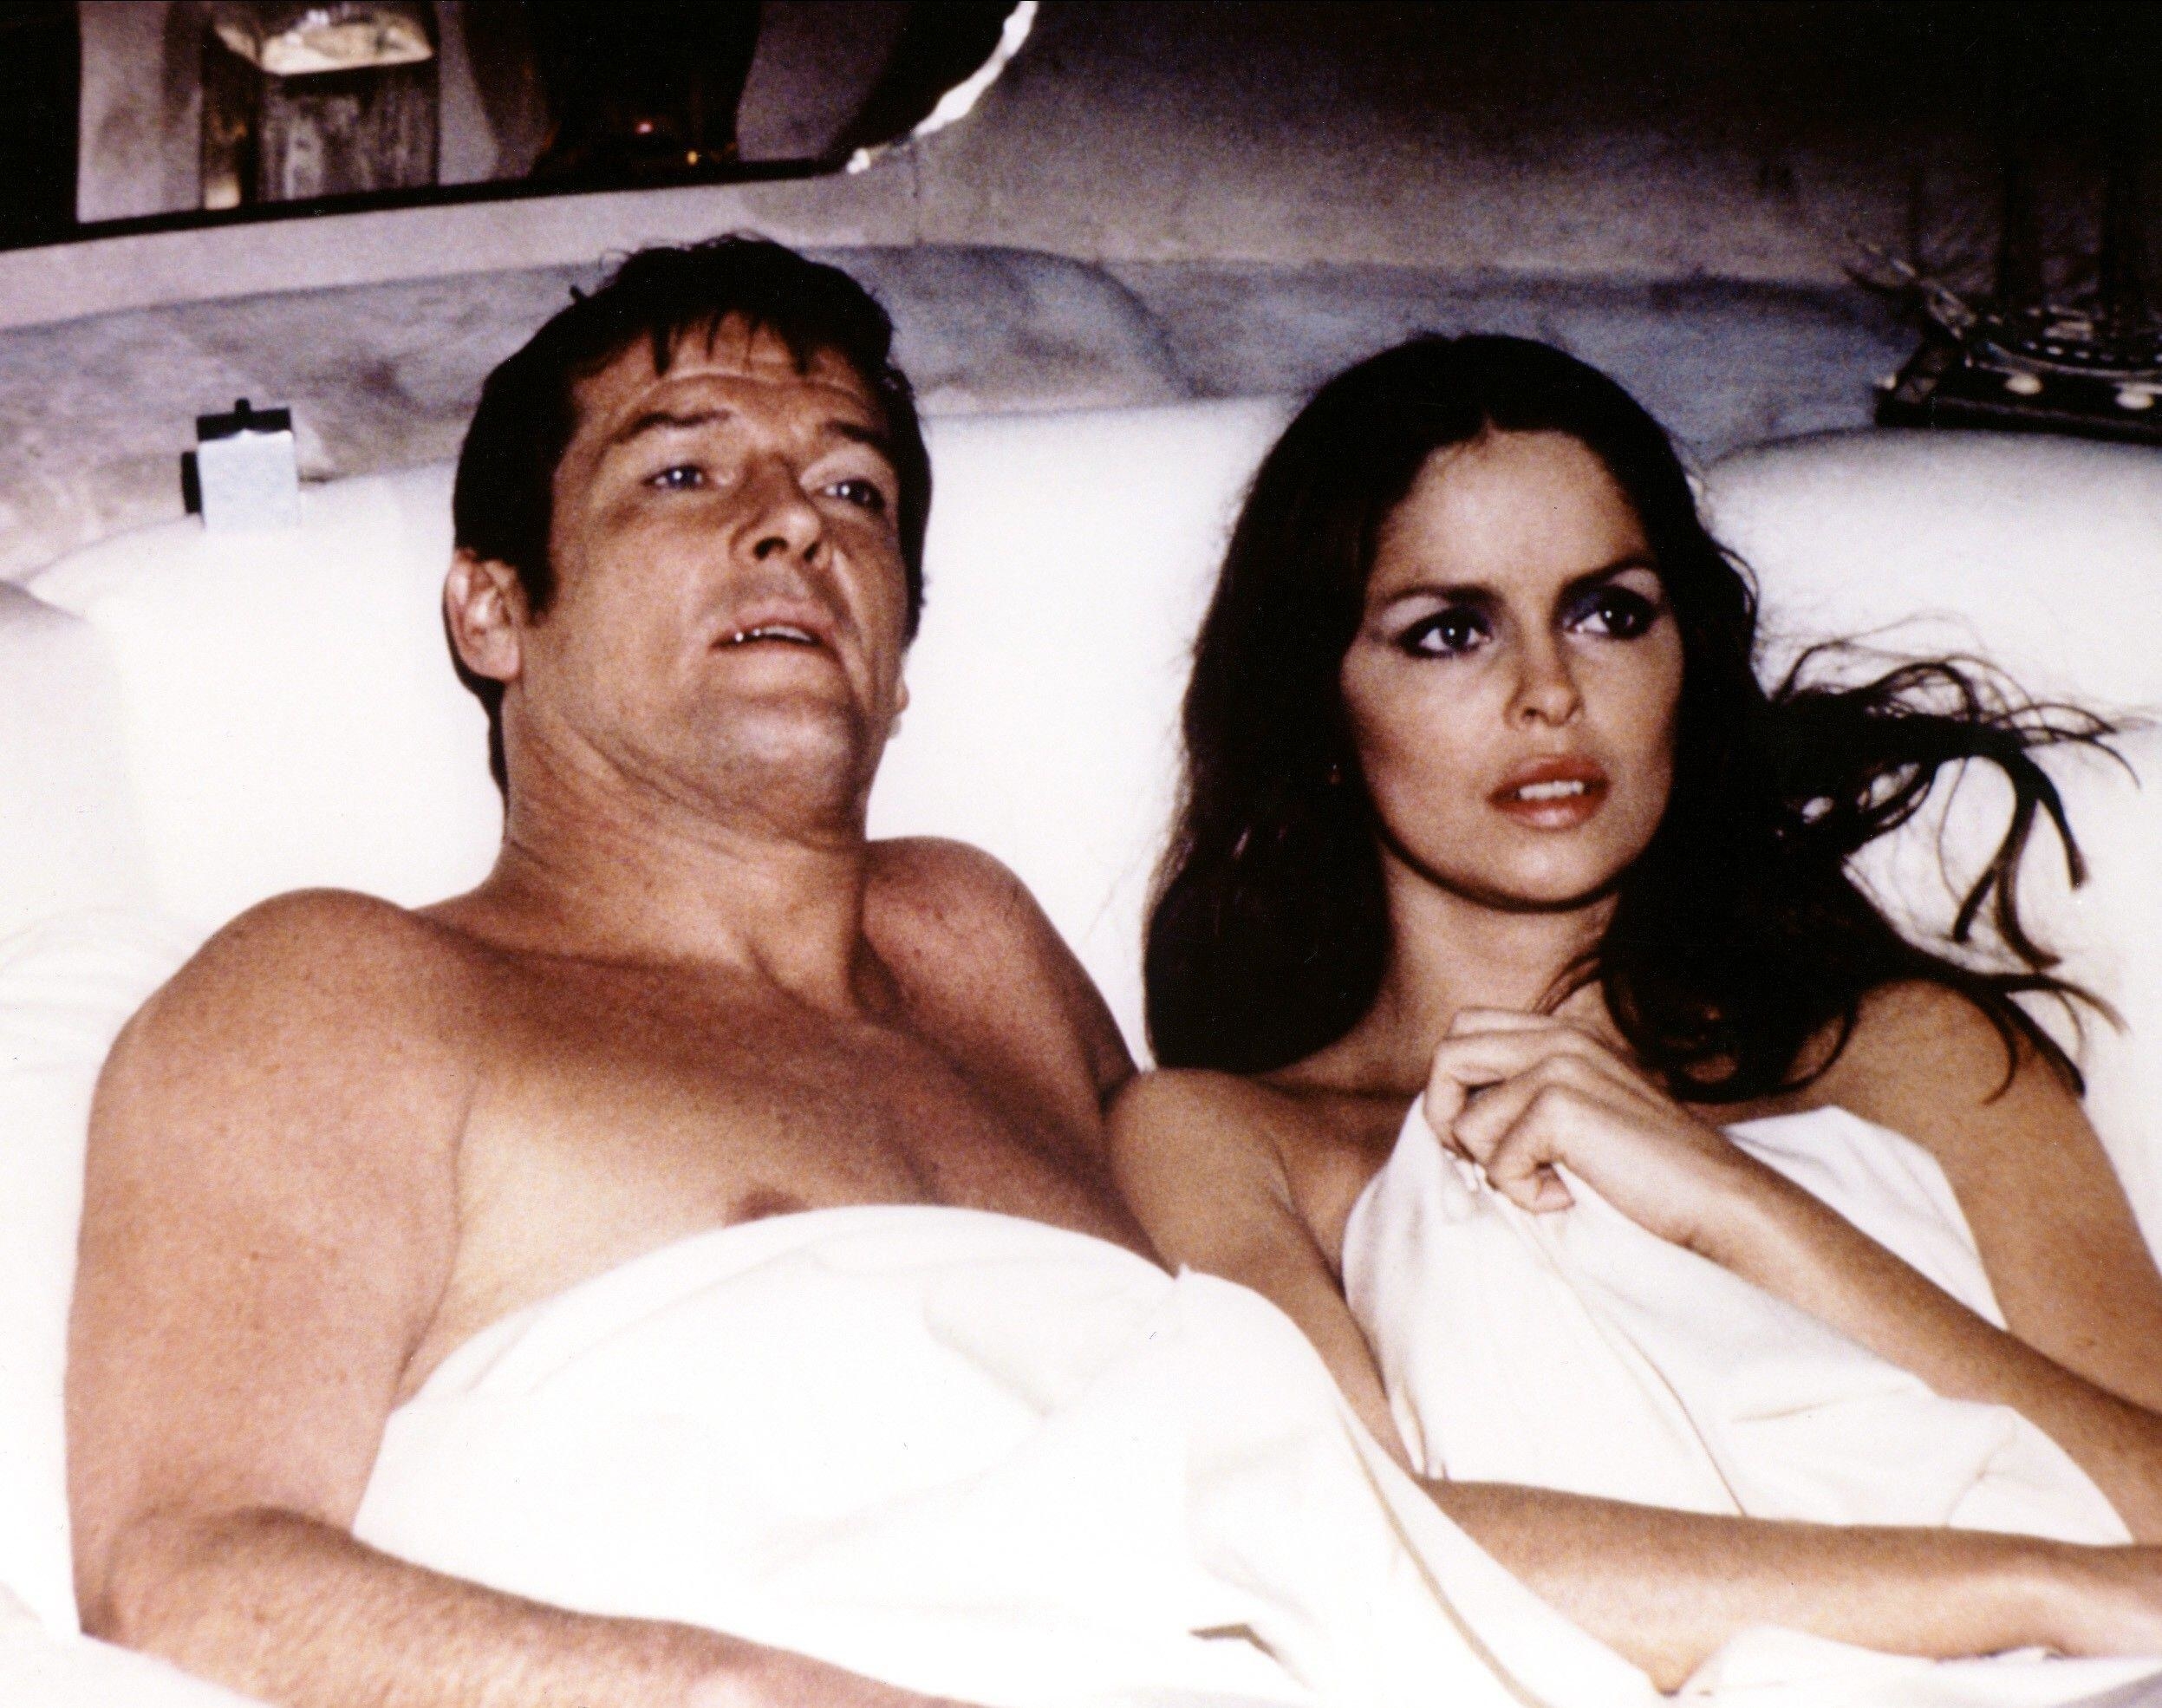 James Bond and a woman lying unclothed under the sheets